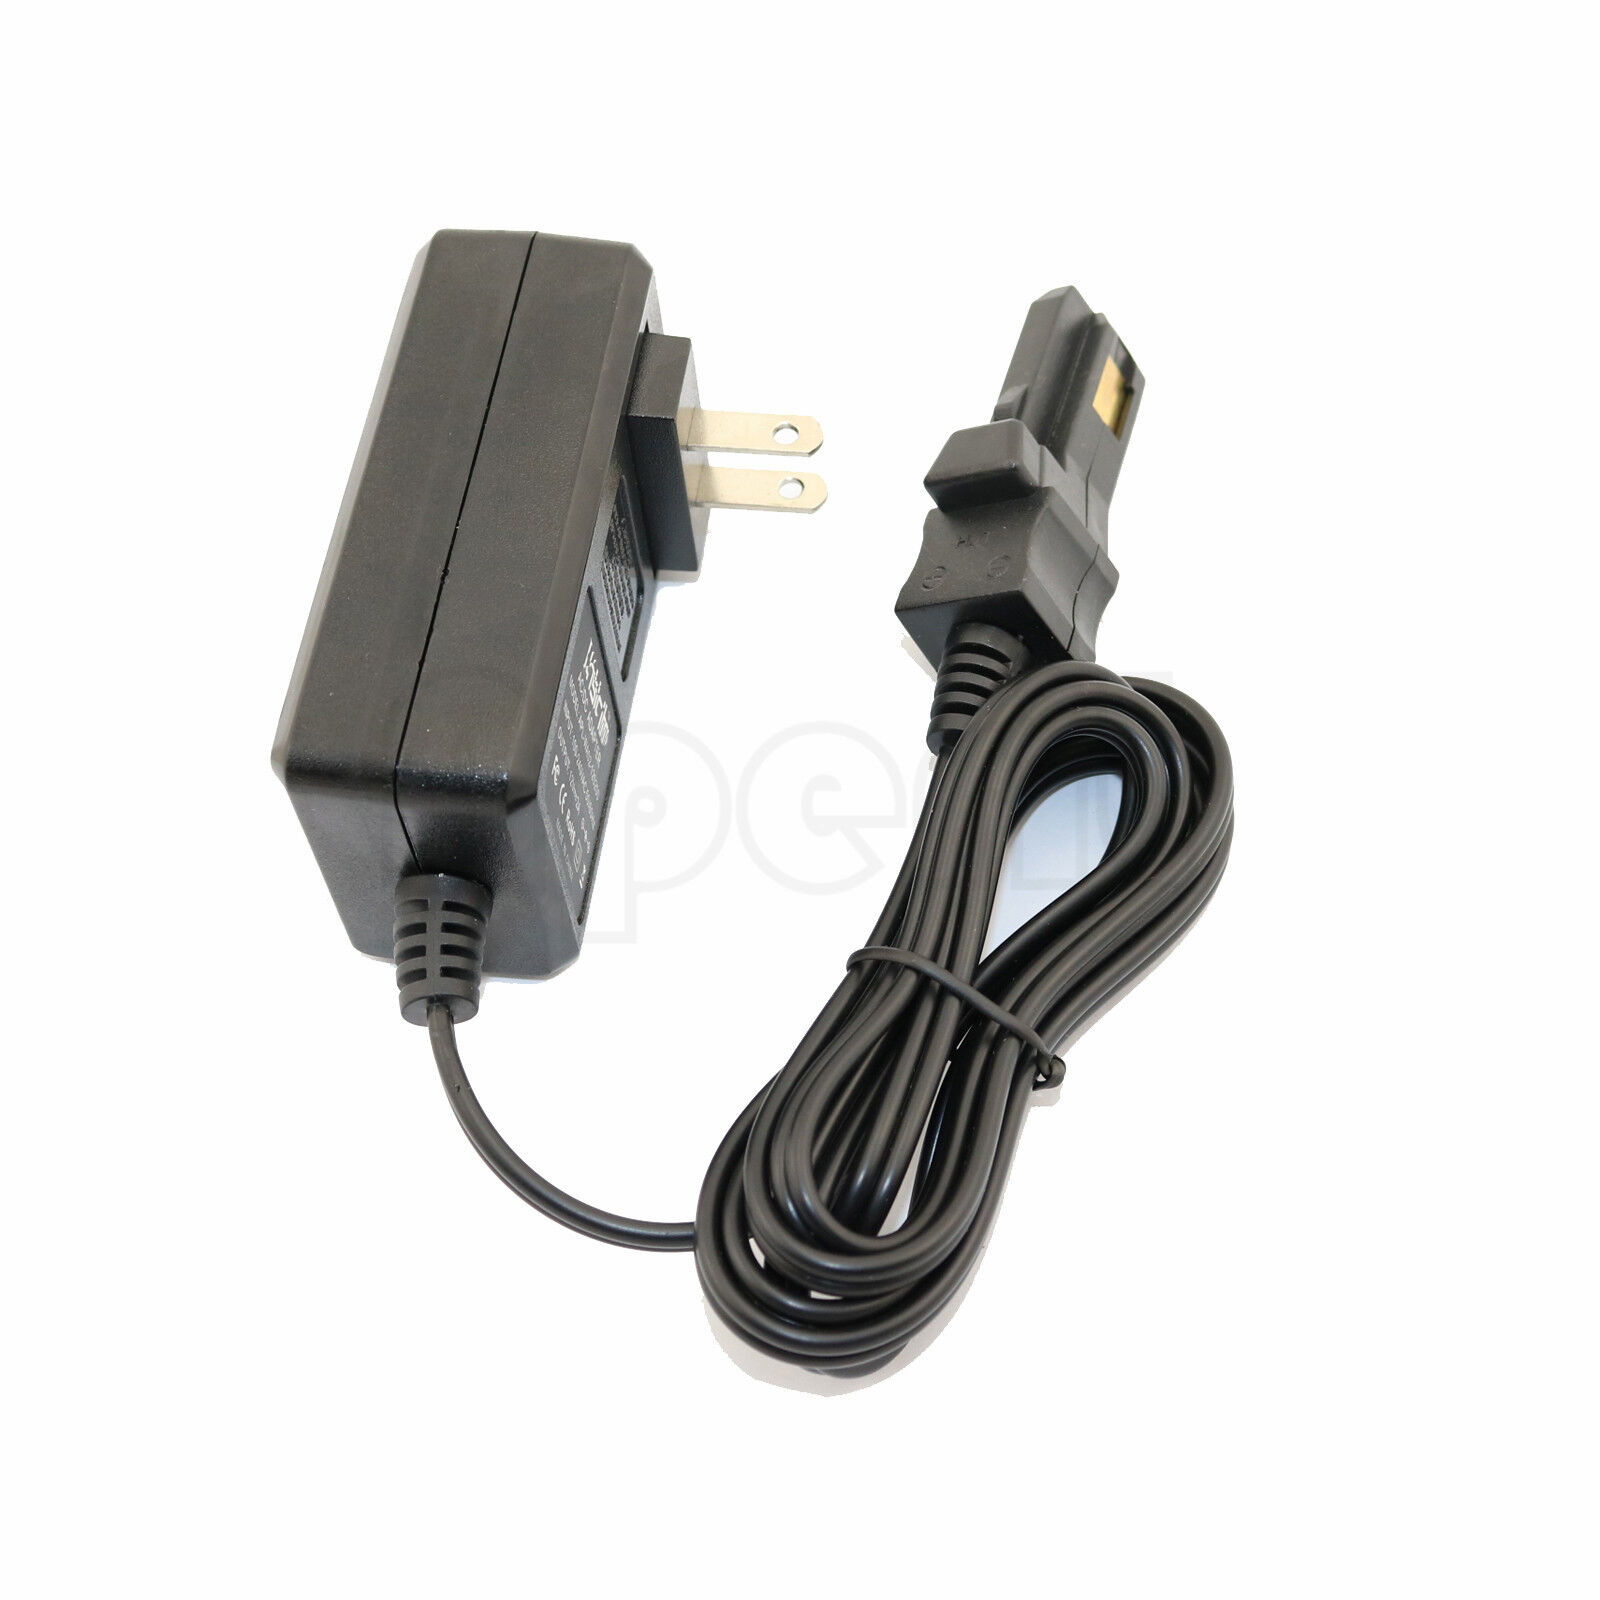 *Brand NEW* for Power Wheels P8812 Barbie Mustang Charger AC/DC Adapter Charger - Click Image to Close